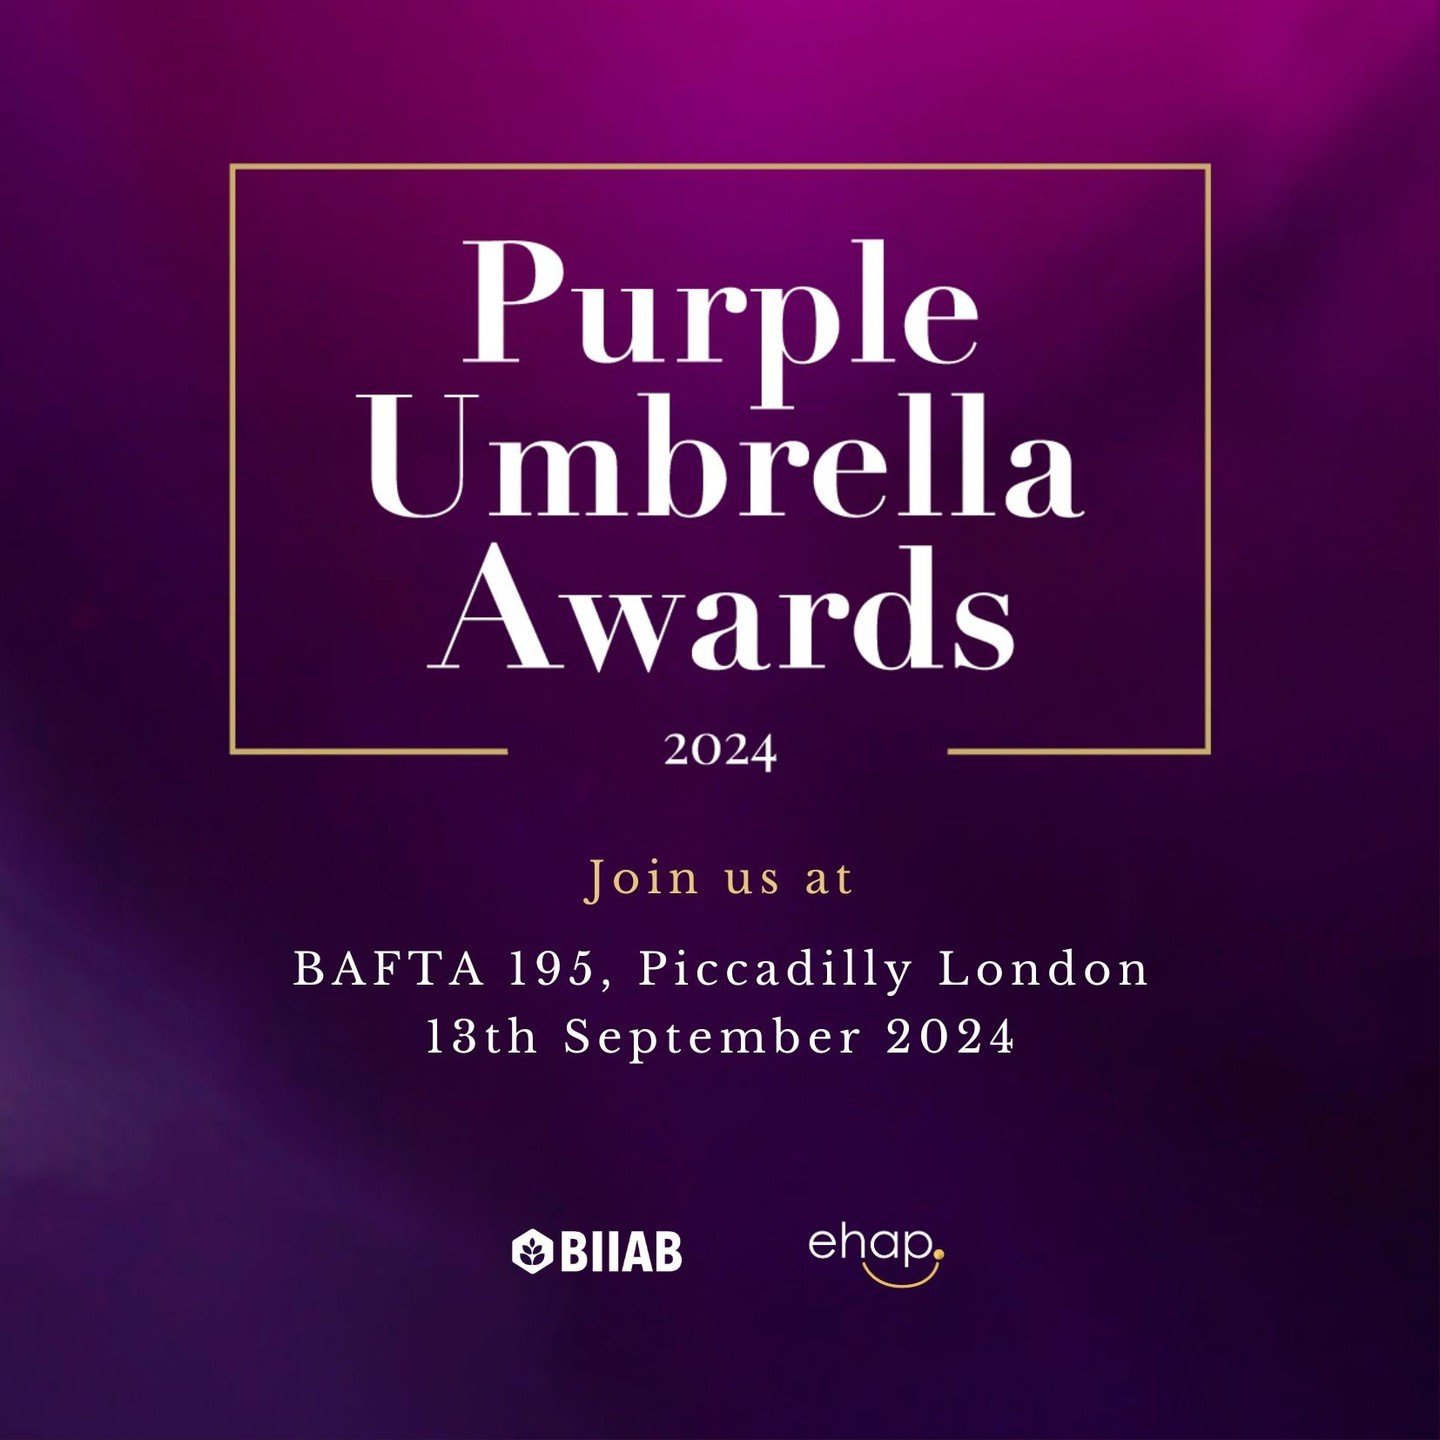 ☂️ Save the Date! ☂️
 
We are so excited to announce the date for the Purple Umbrella Awards 2024!! 
 
Get ready to join us on Friday 13th September 2024 where we are delighted to once again be at at BAFTA 195, Piccadilly London. We can't wait to cel